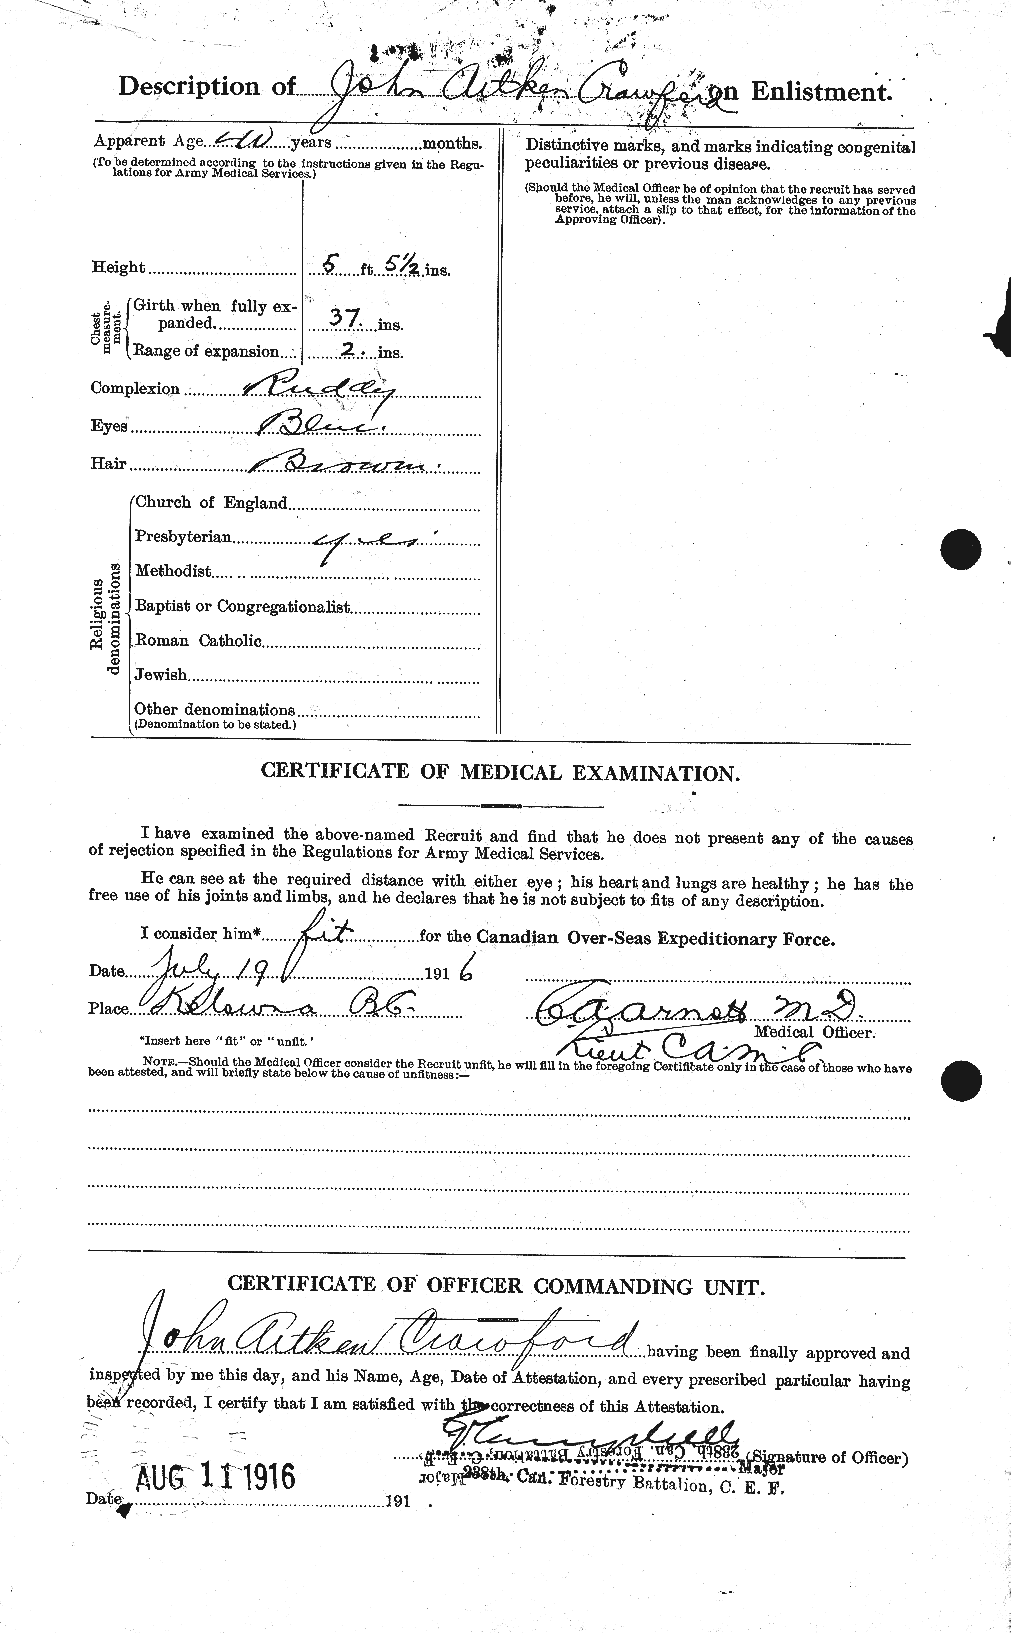 Personnel Records of the First World War - CEF 062436b